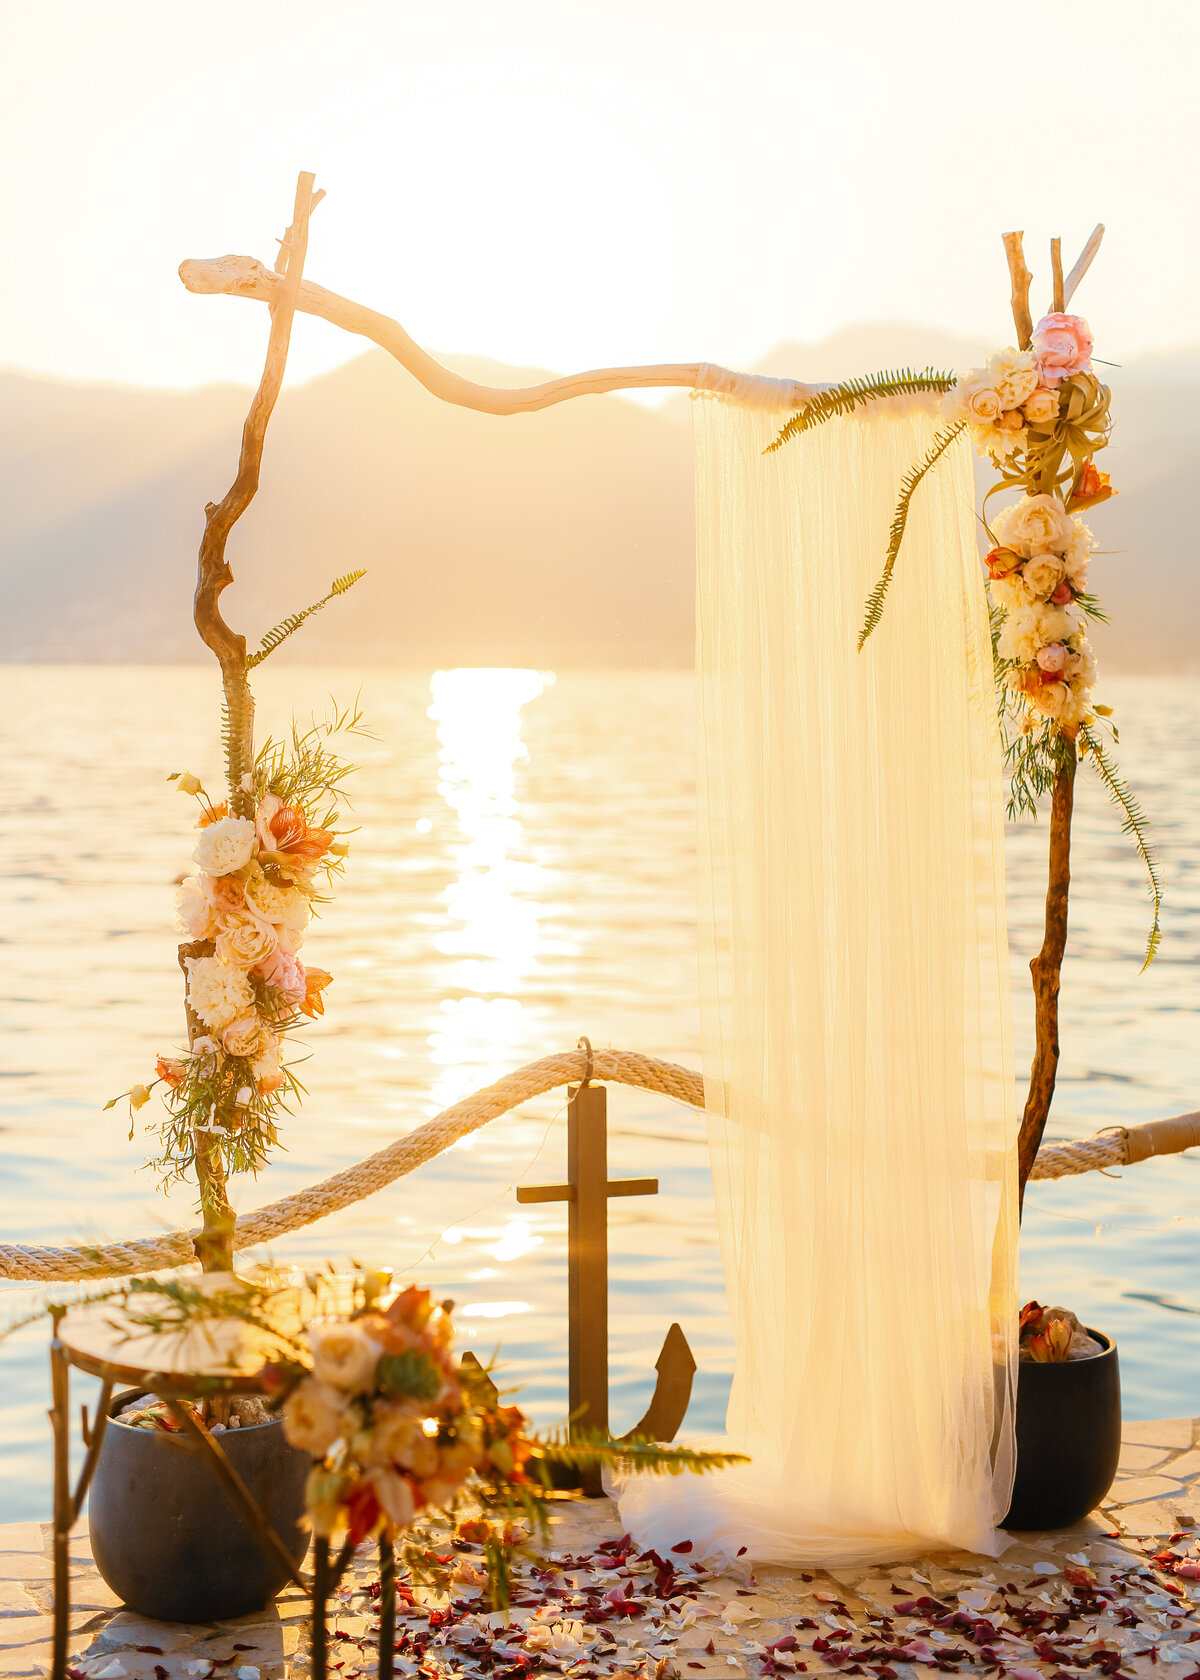 A ceremony arch is decorated with flowers and a drape against the ocean at sunset in Greece.